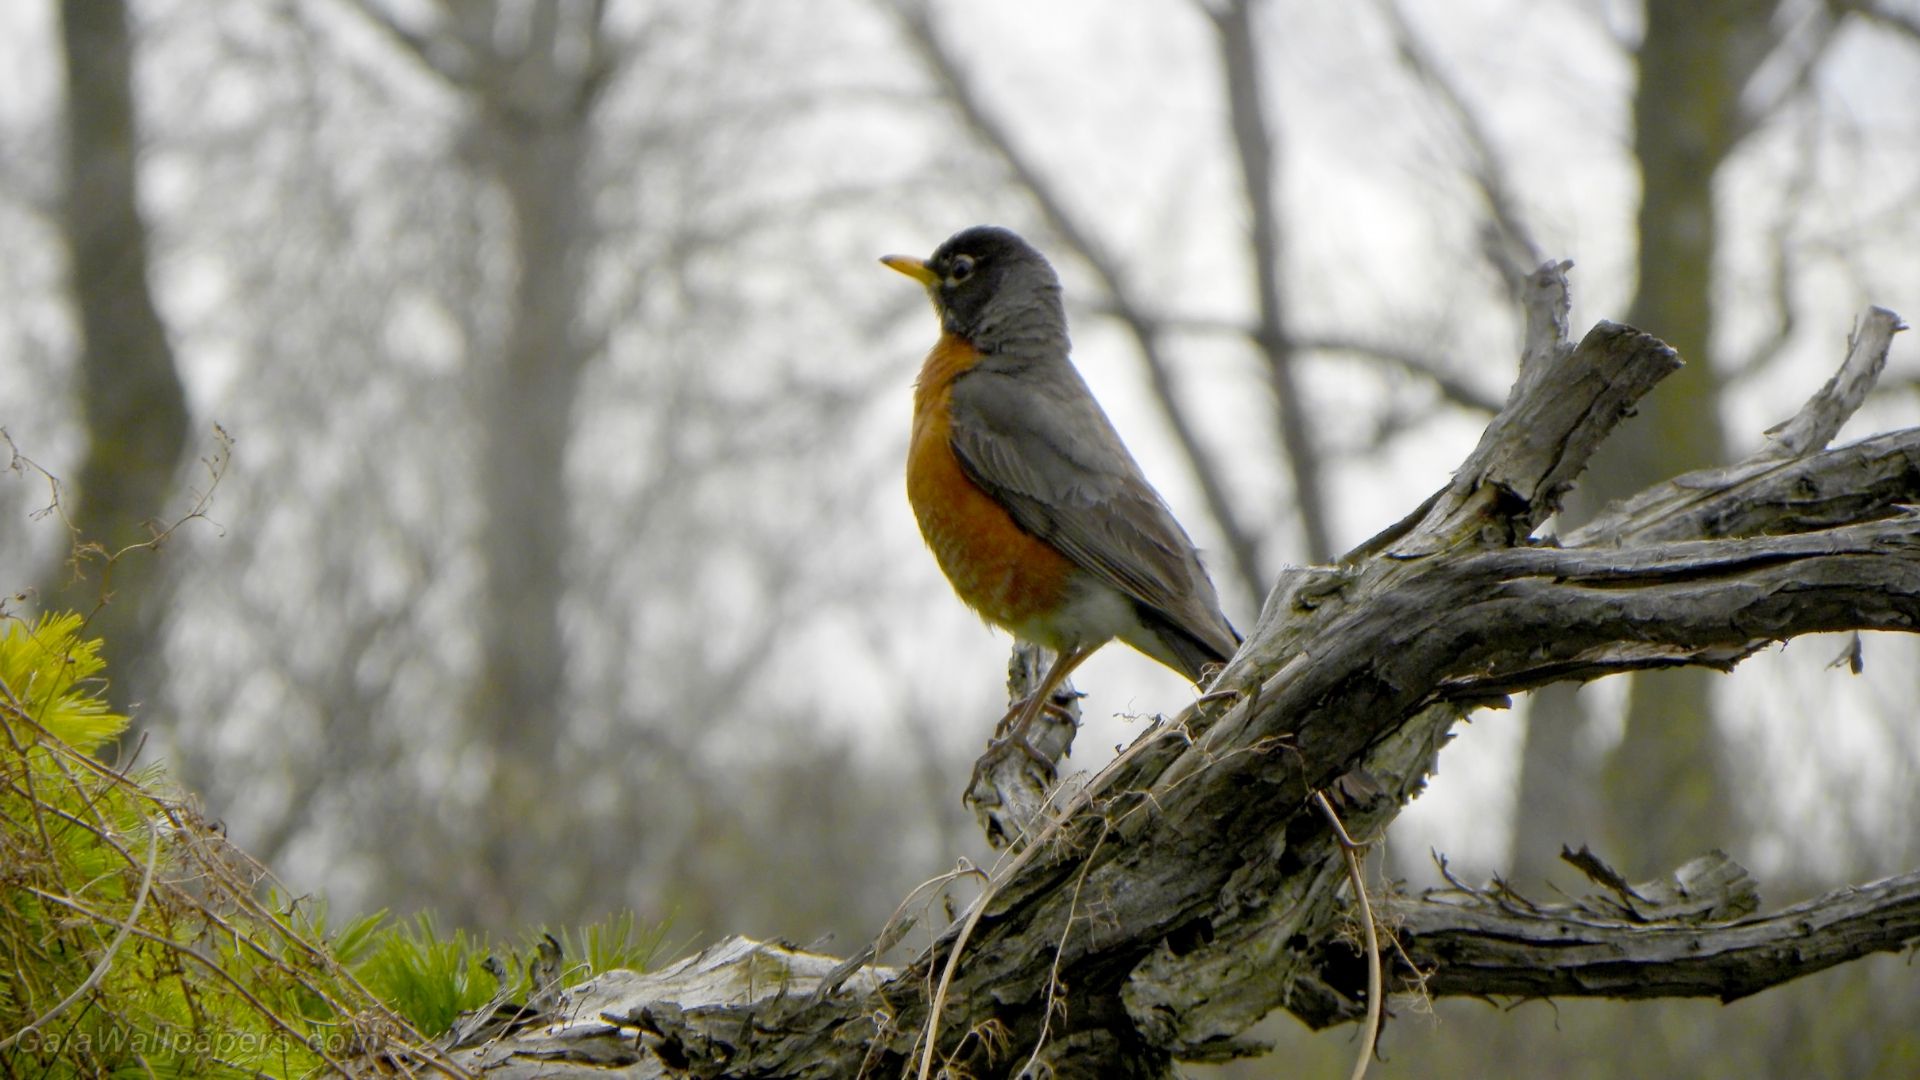 American Robin on his arrival at spring wallpaper 1920x1080